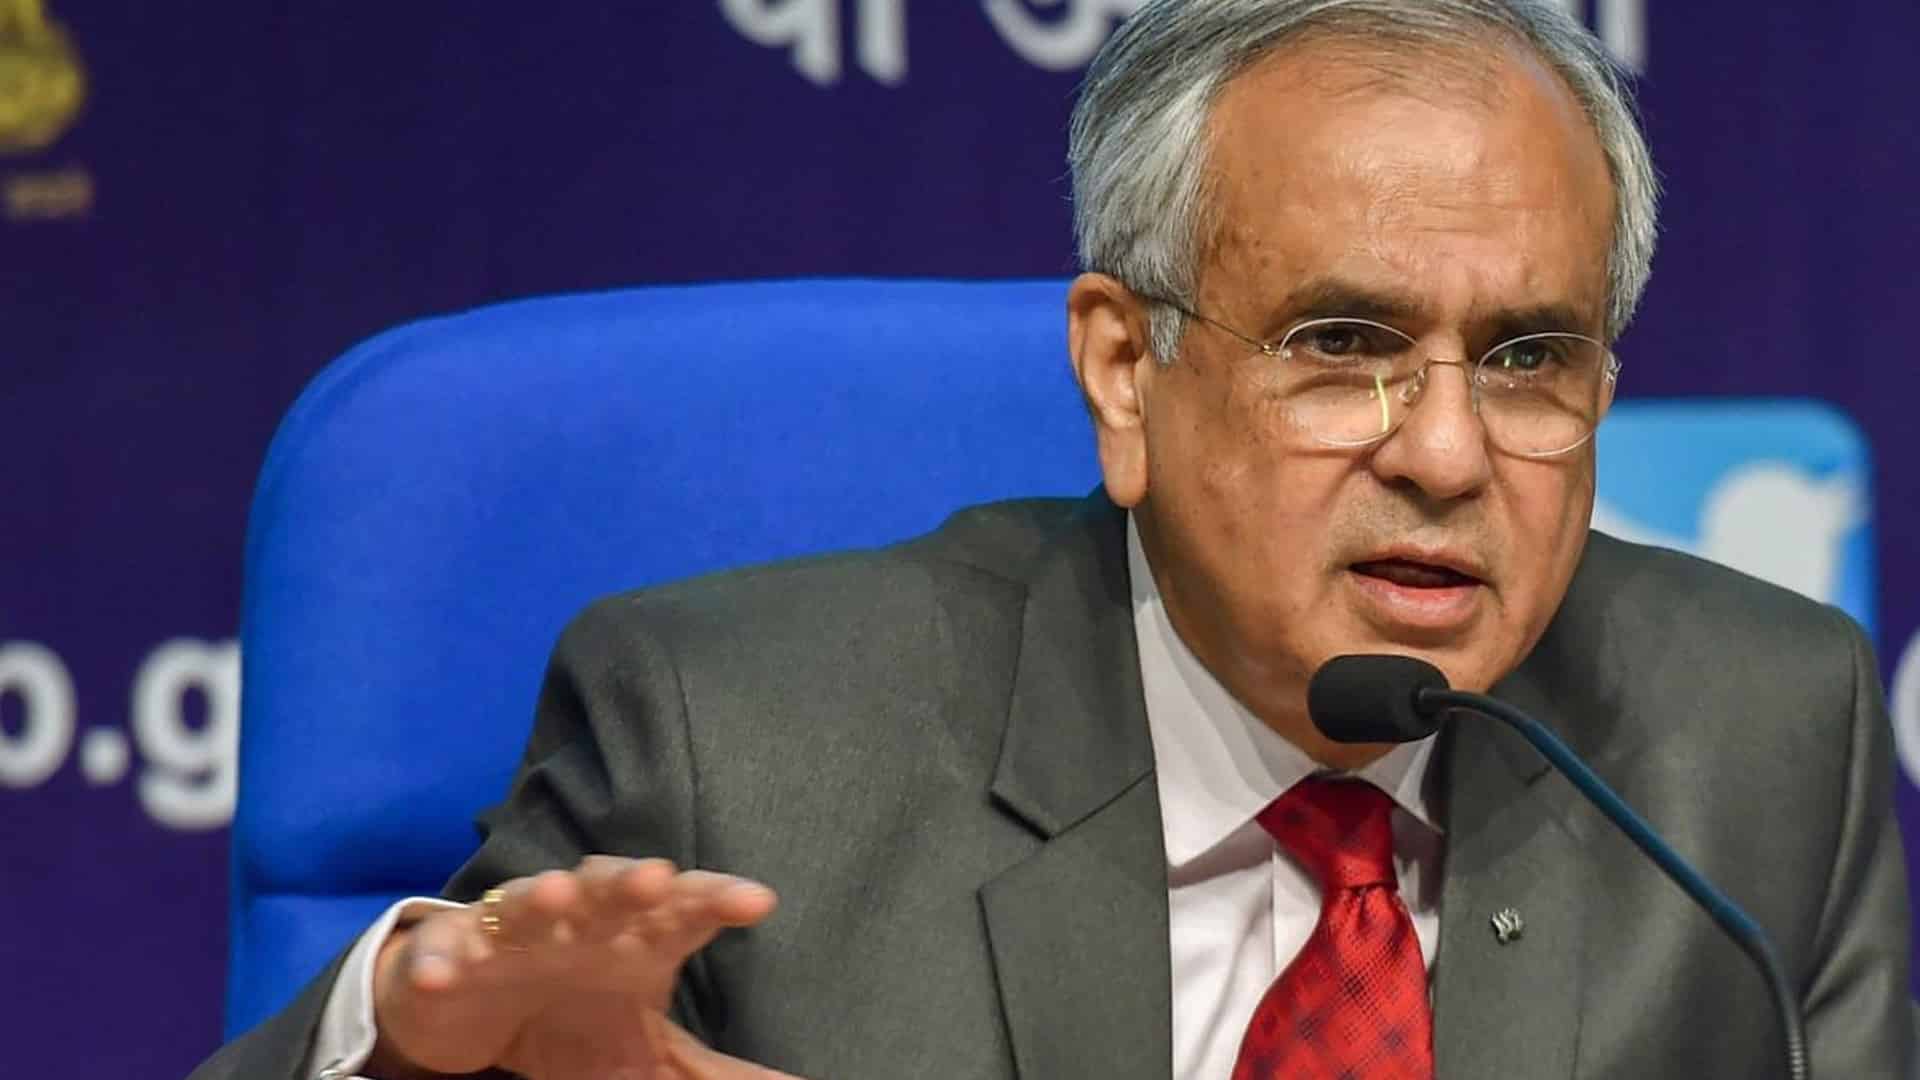 MSME sector needs most policy attention of all stakeholders: Niti Aayog VC